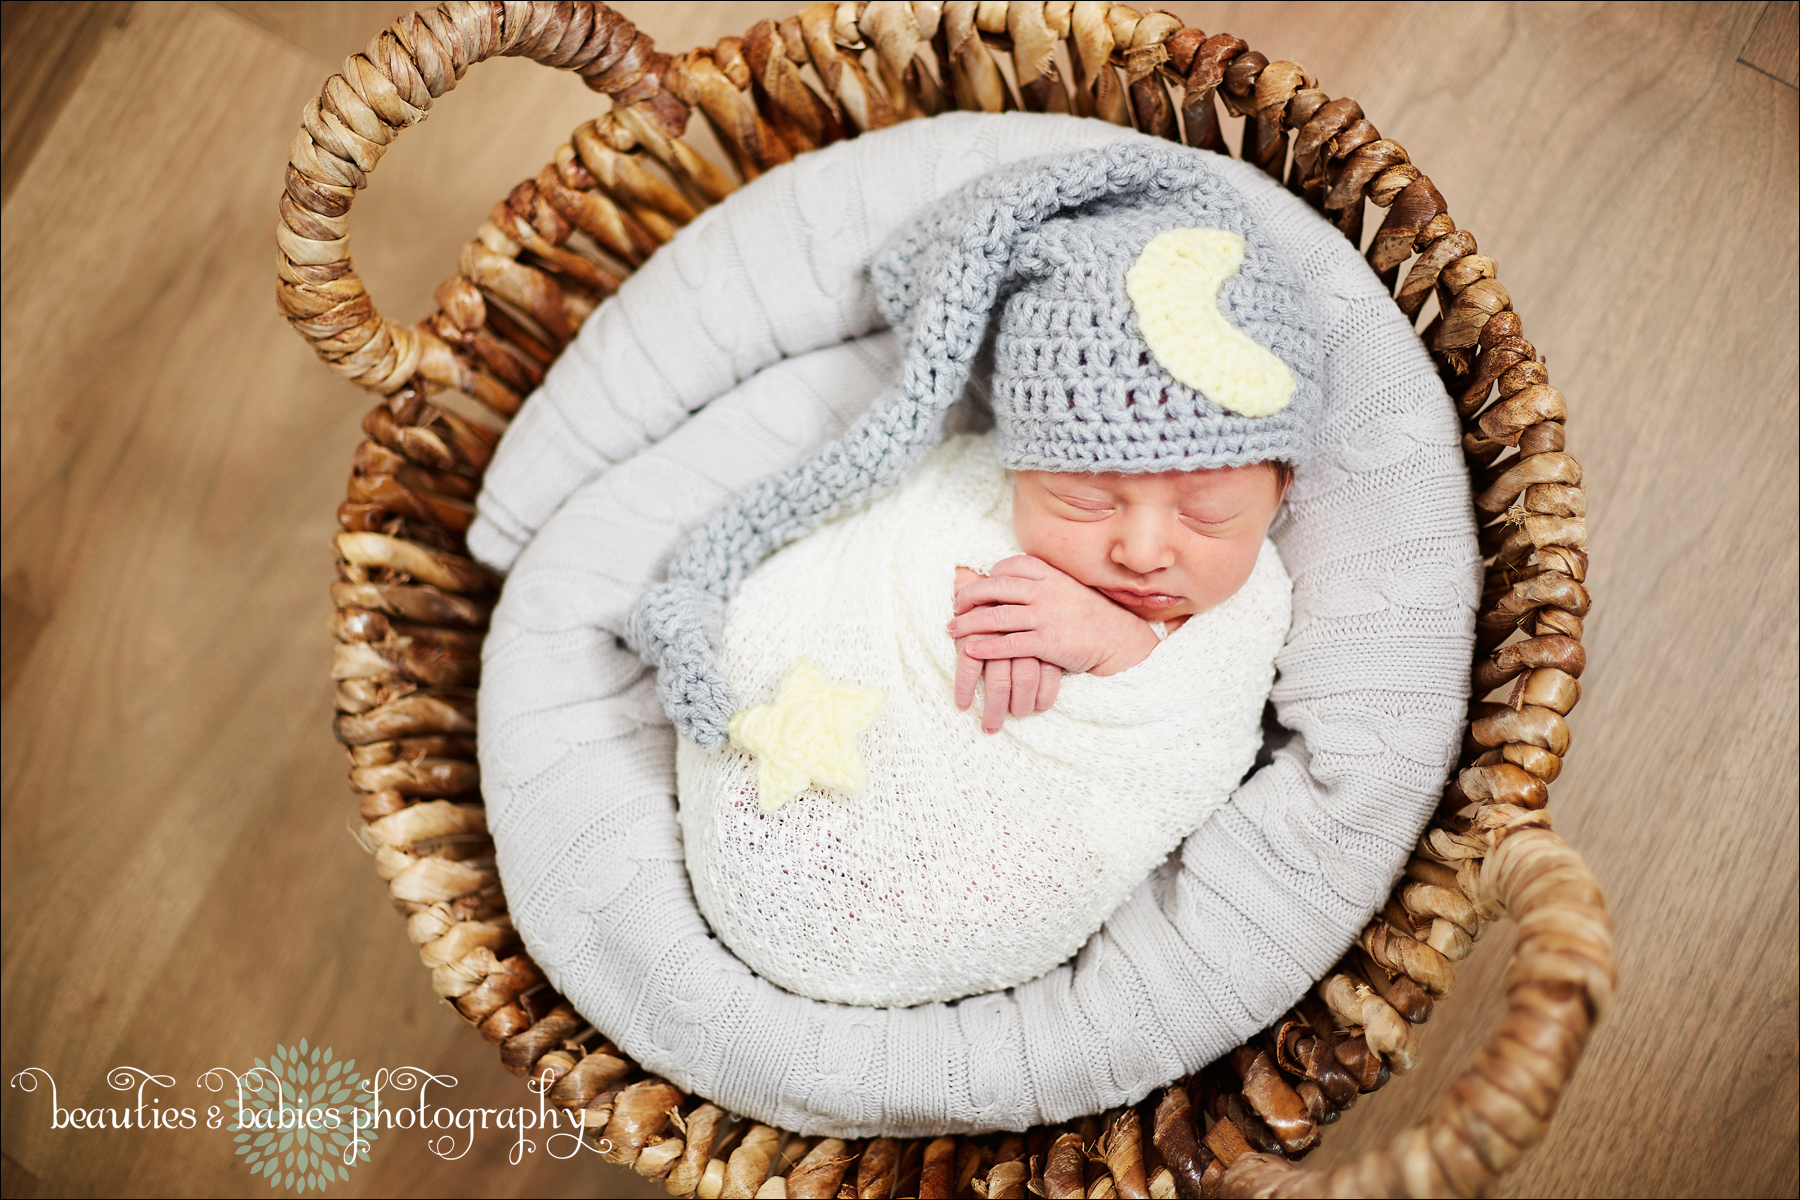 at-home newborn baby photography Los Angeles baby and family portrait and lifestyle photographer